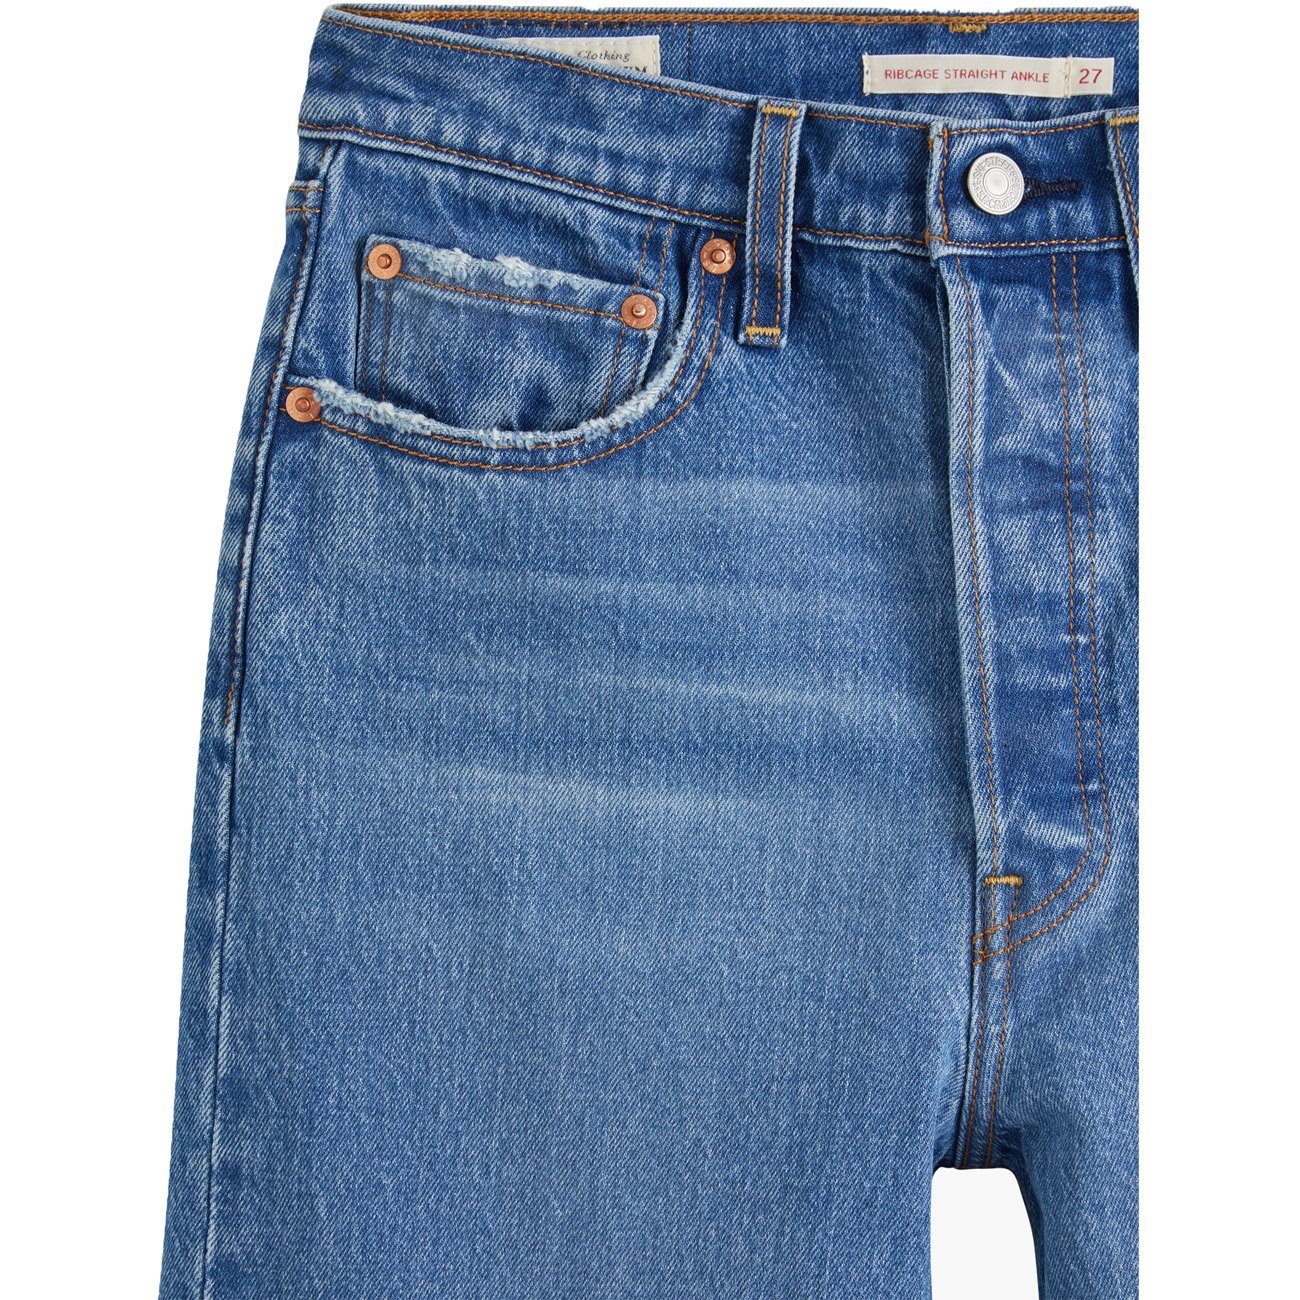 ANKLE RIBCAGE STRAIGHT Straight-Jeans RIBCAGE Levi's® STRAIGHT ANKLE